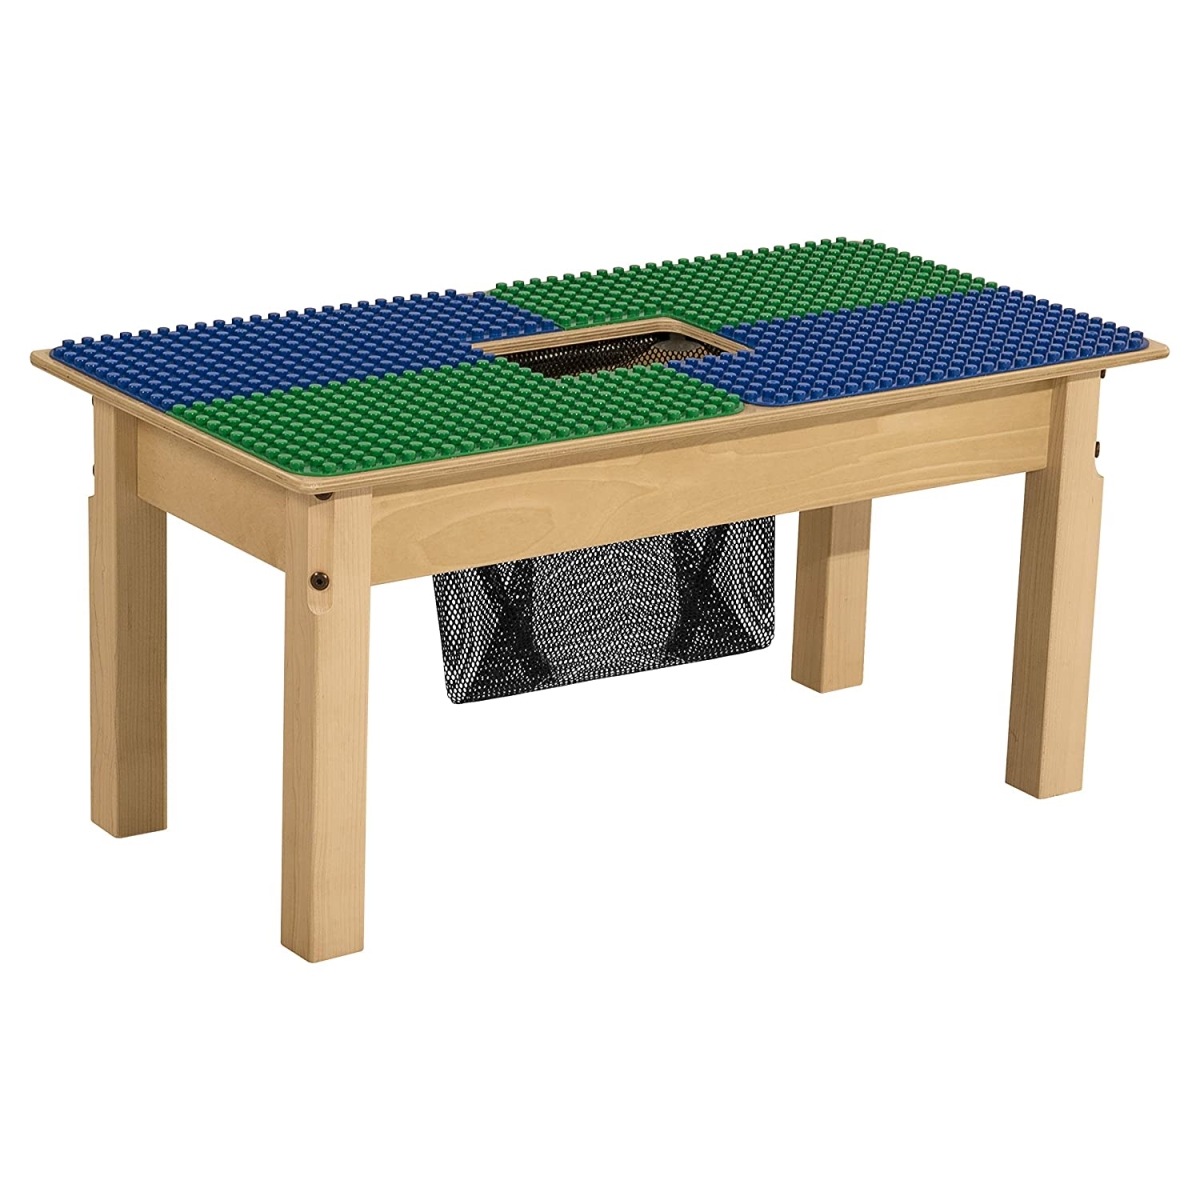 Tp1631pgn16-bg 16 In. Duplo Compatible Table With Legs, Blue & Green - Rectangle